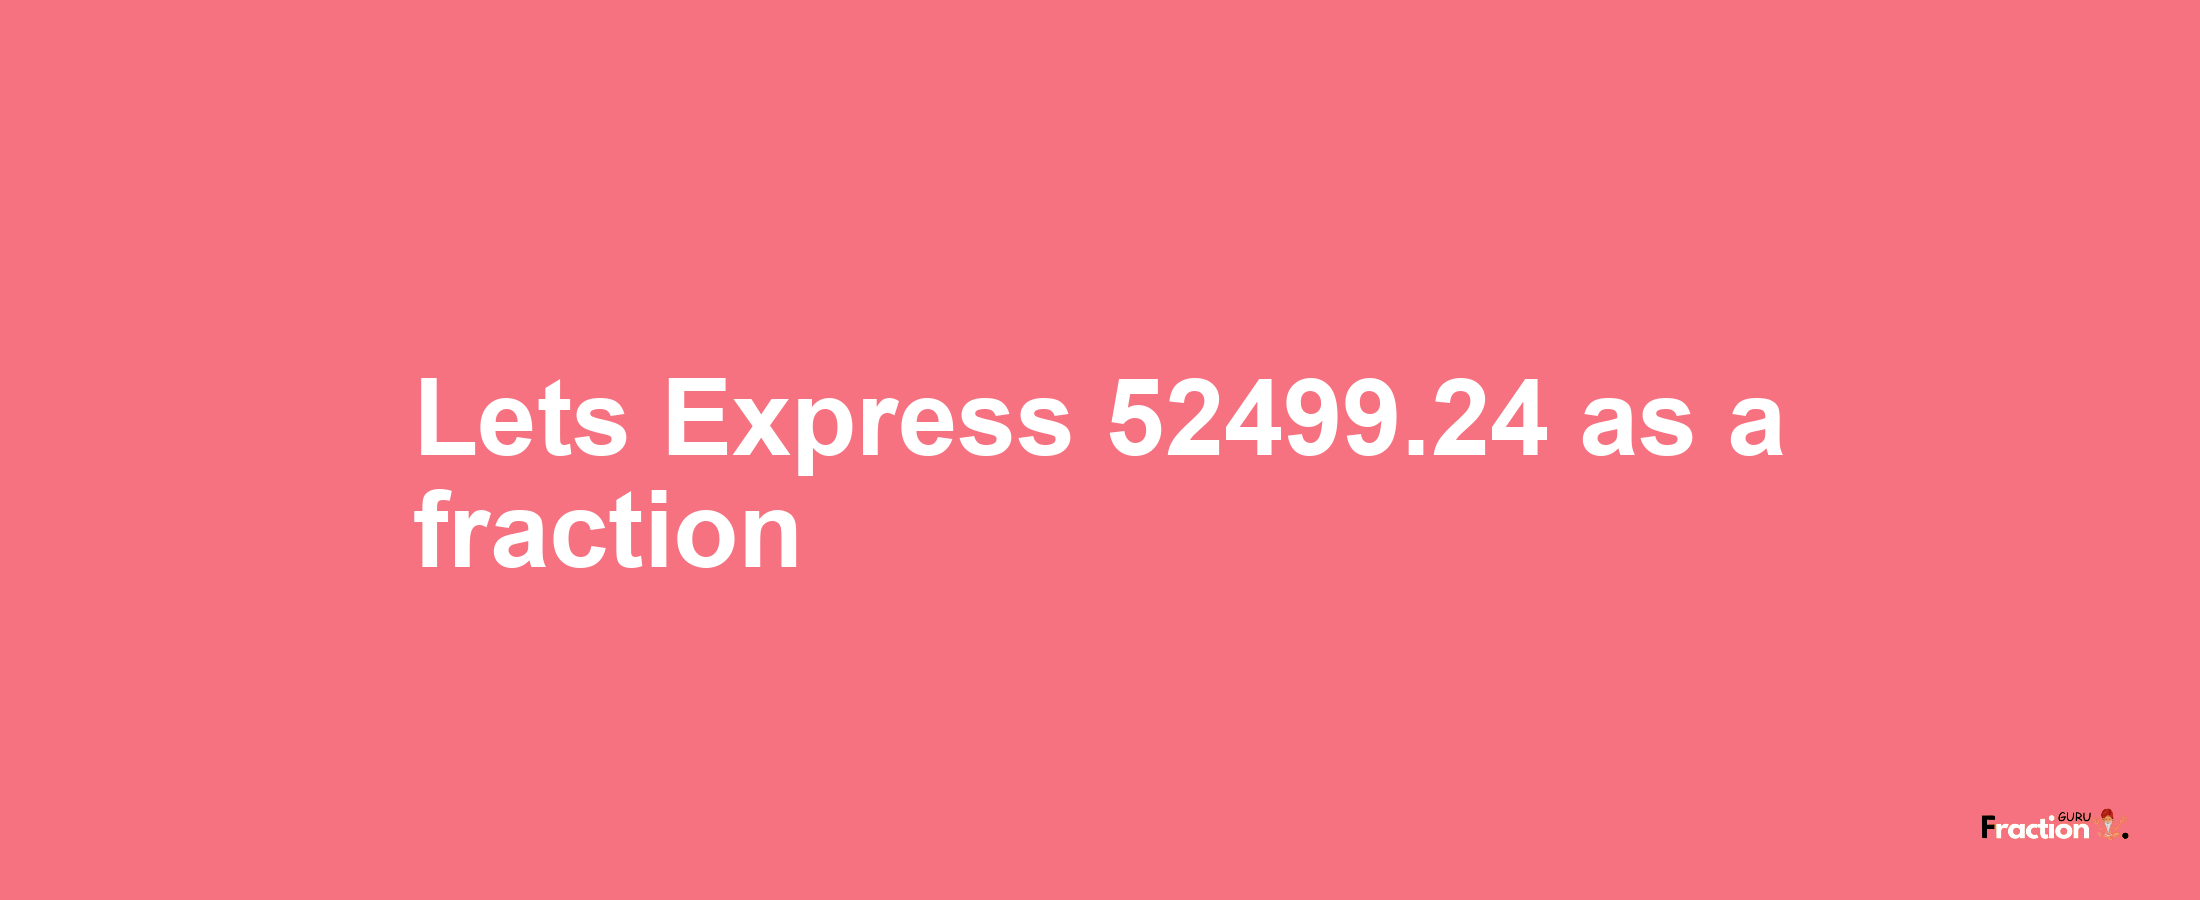 Lets Express 52499.24 as afraction